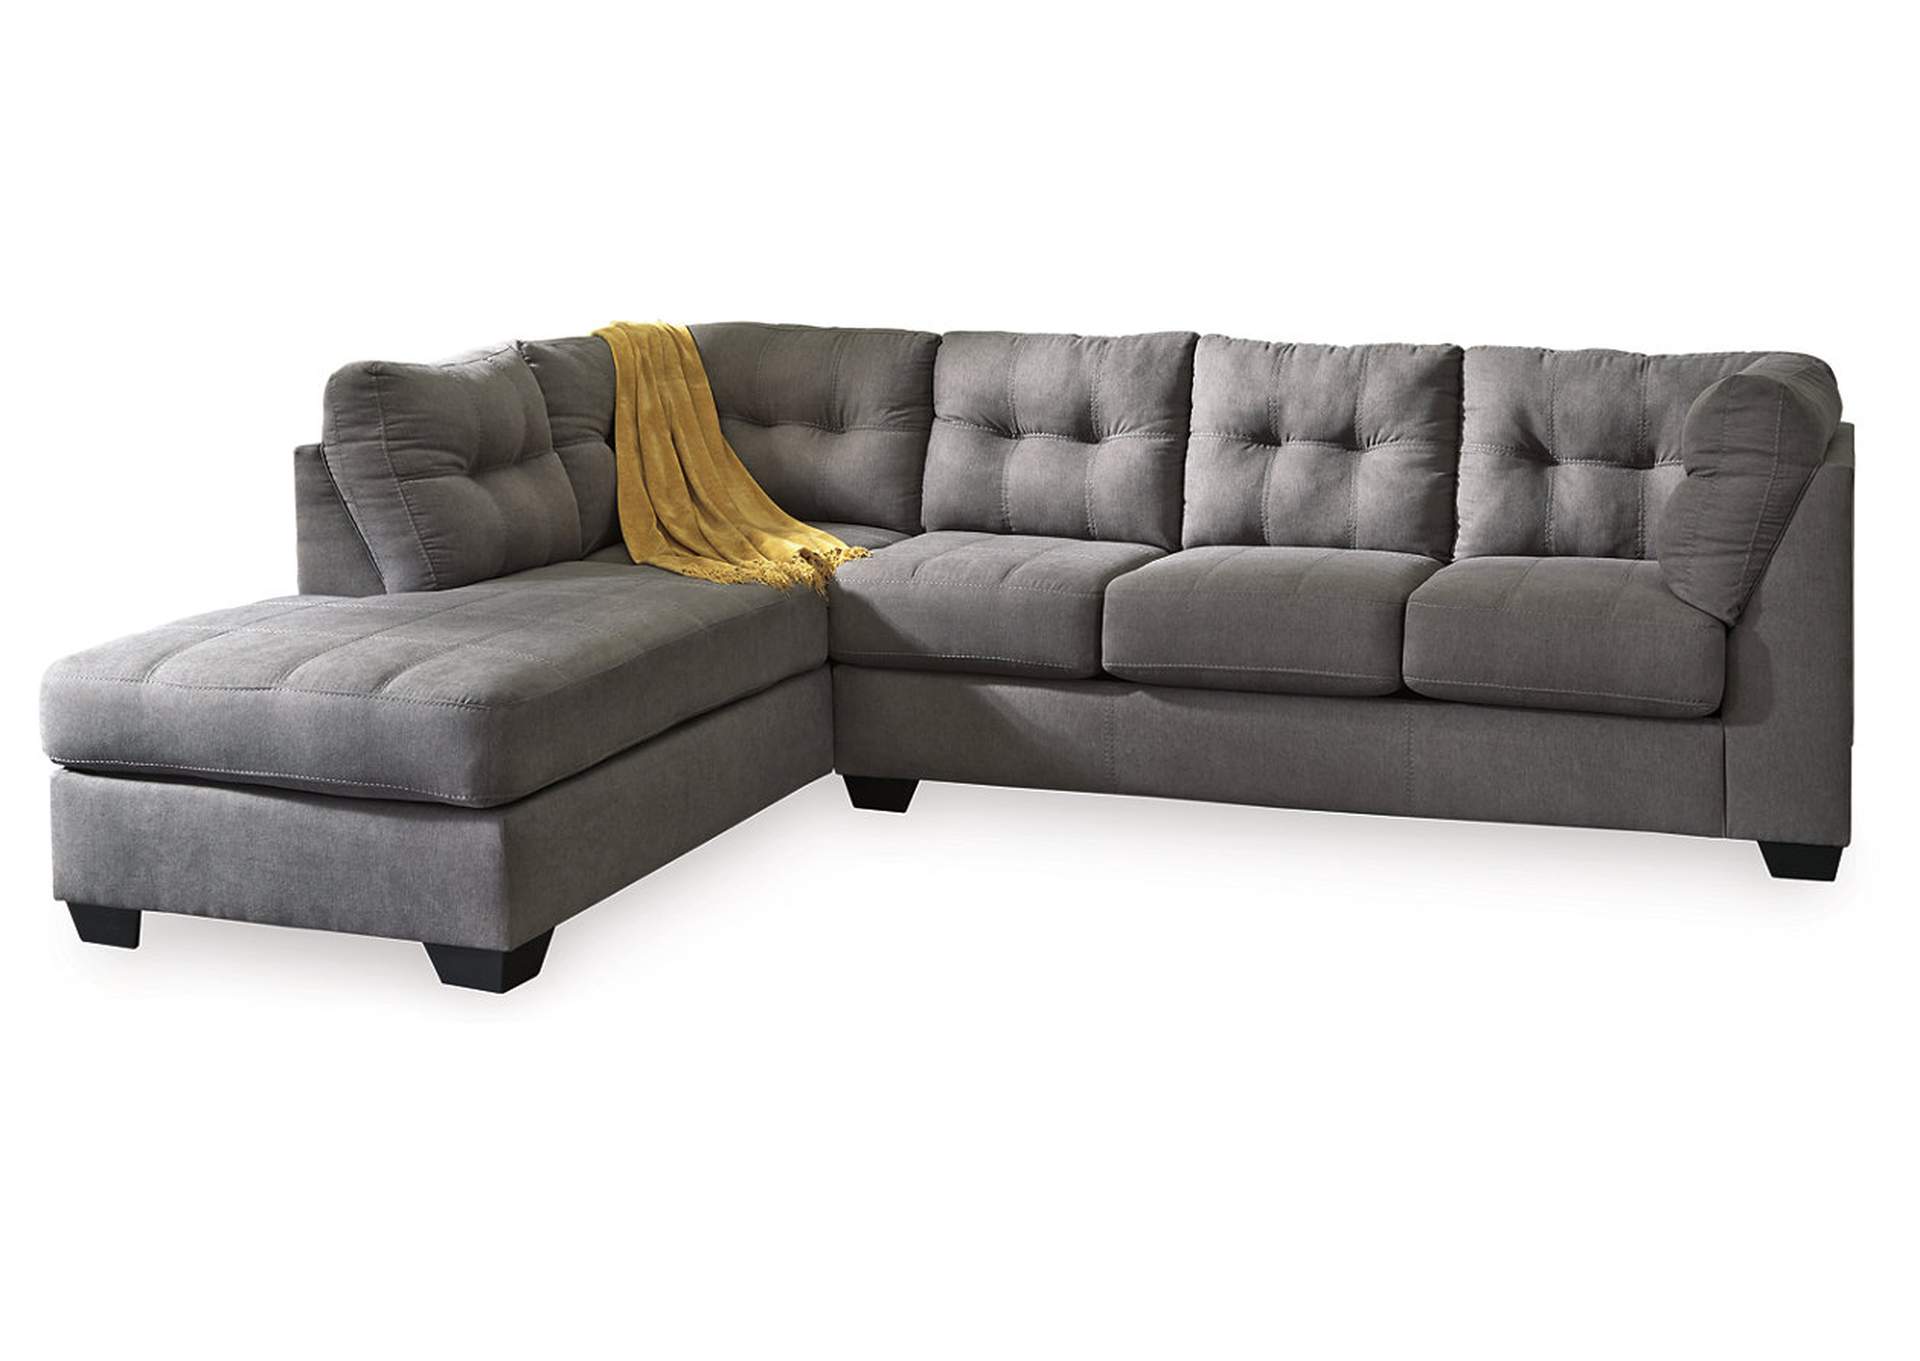 Maier 2-Piece Sleeper Sectional with Chaise,Benchcraft